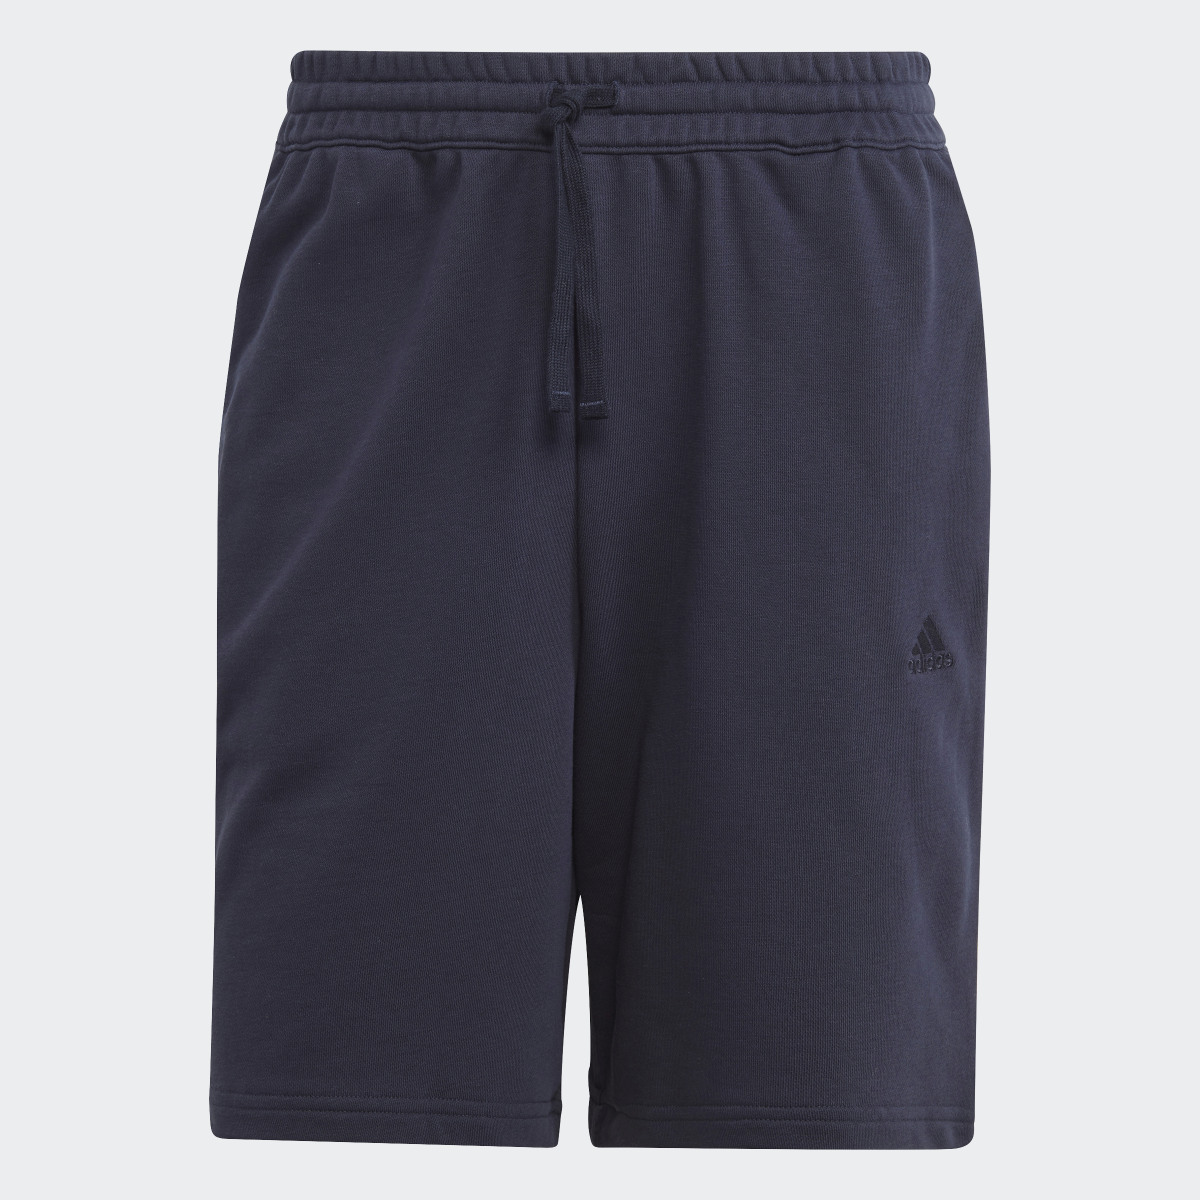 Adidas ALL SZN French Terry Shorts. 4